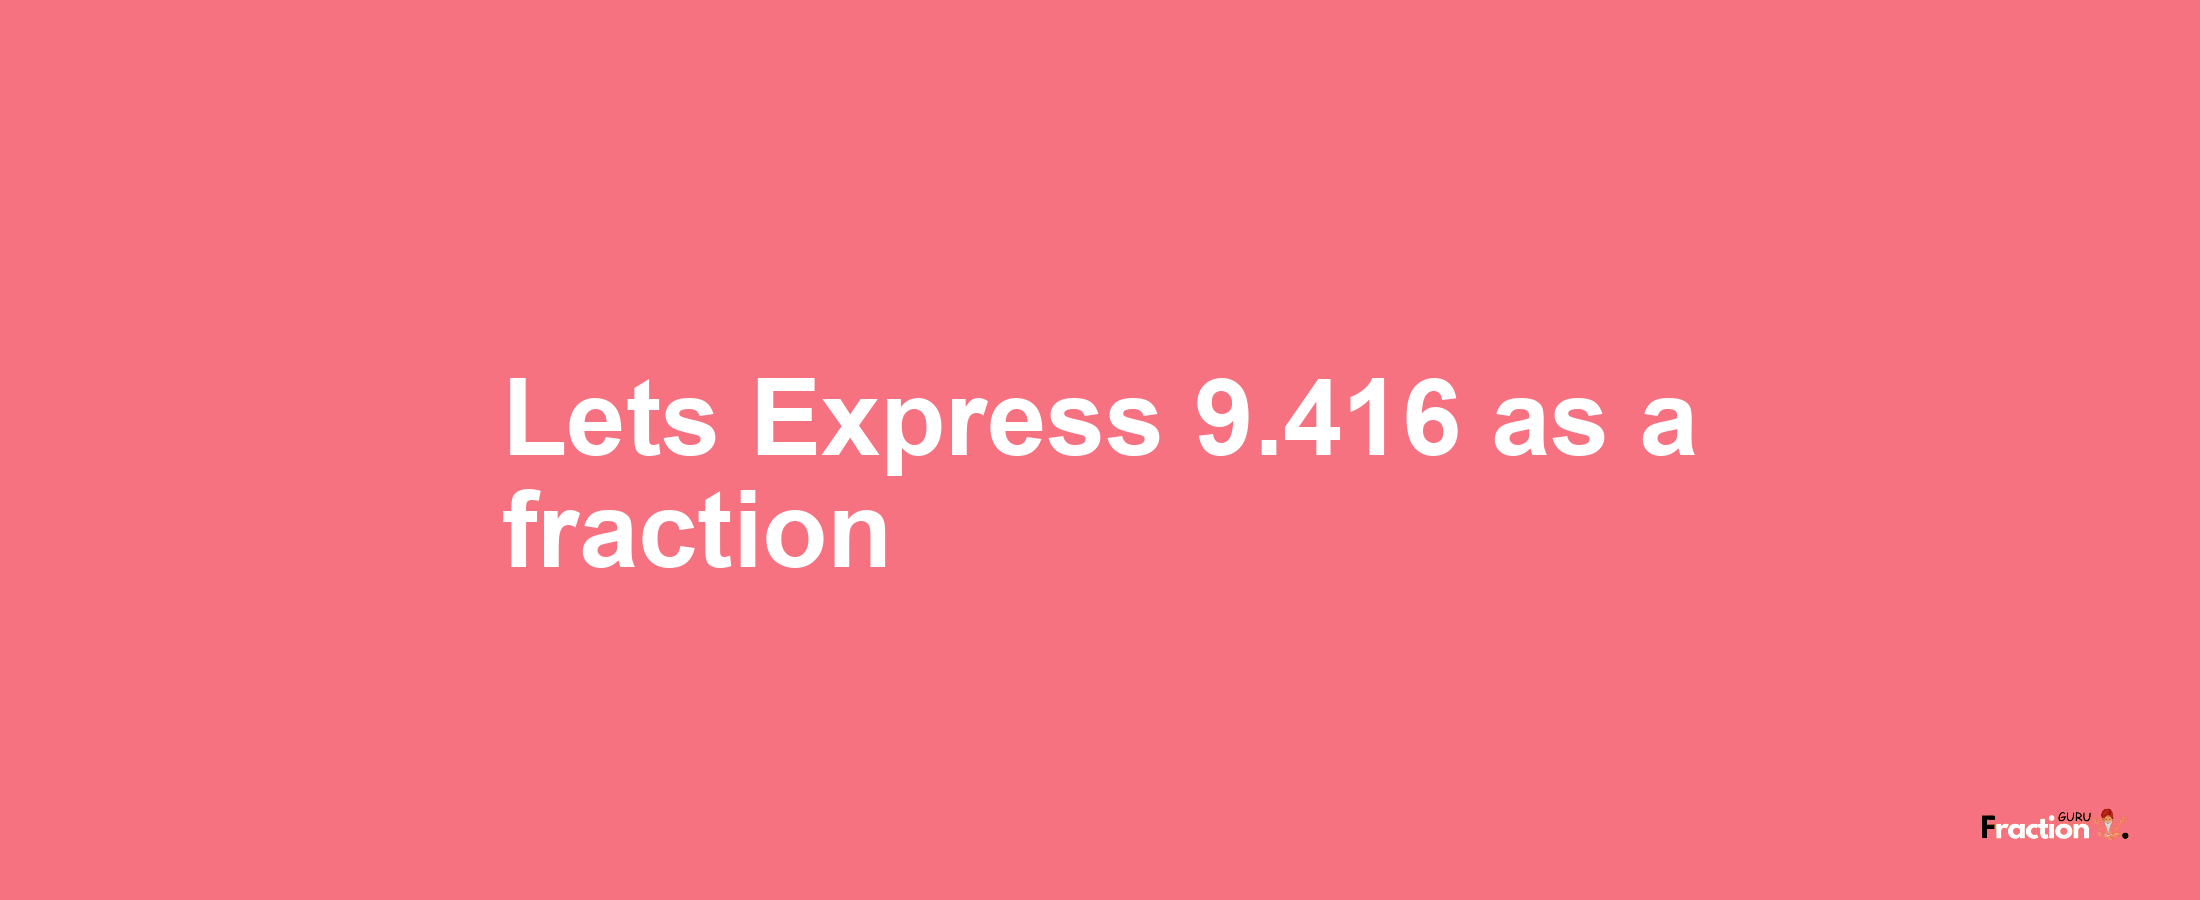 Lets Express 9.416 as afraction